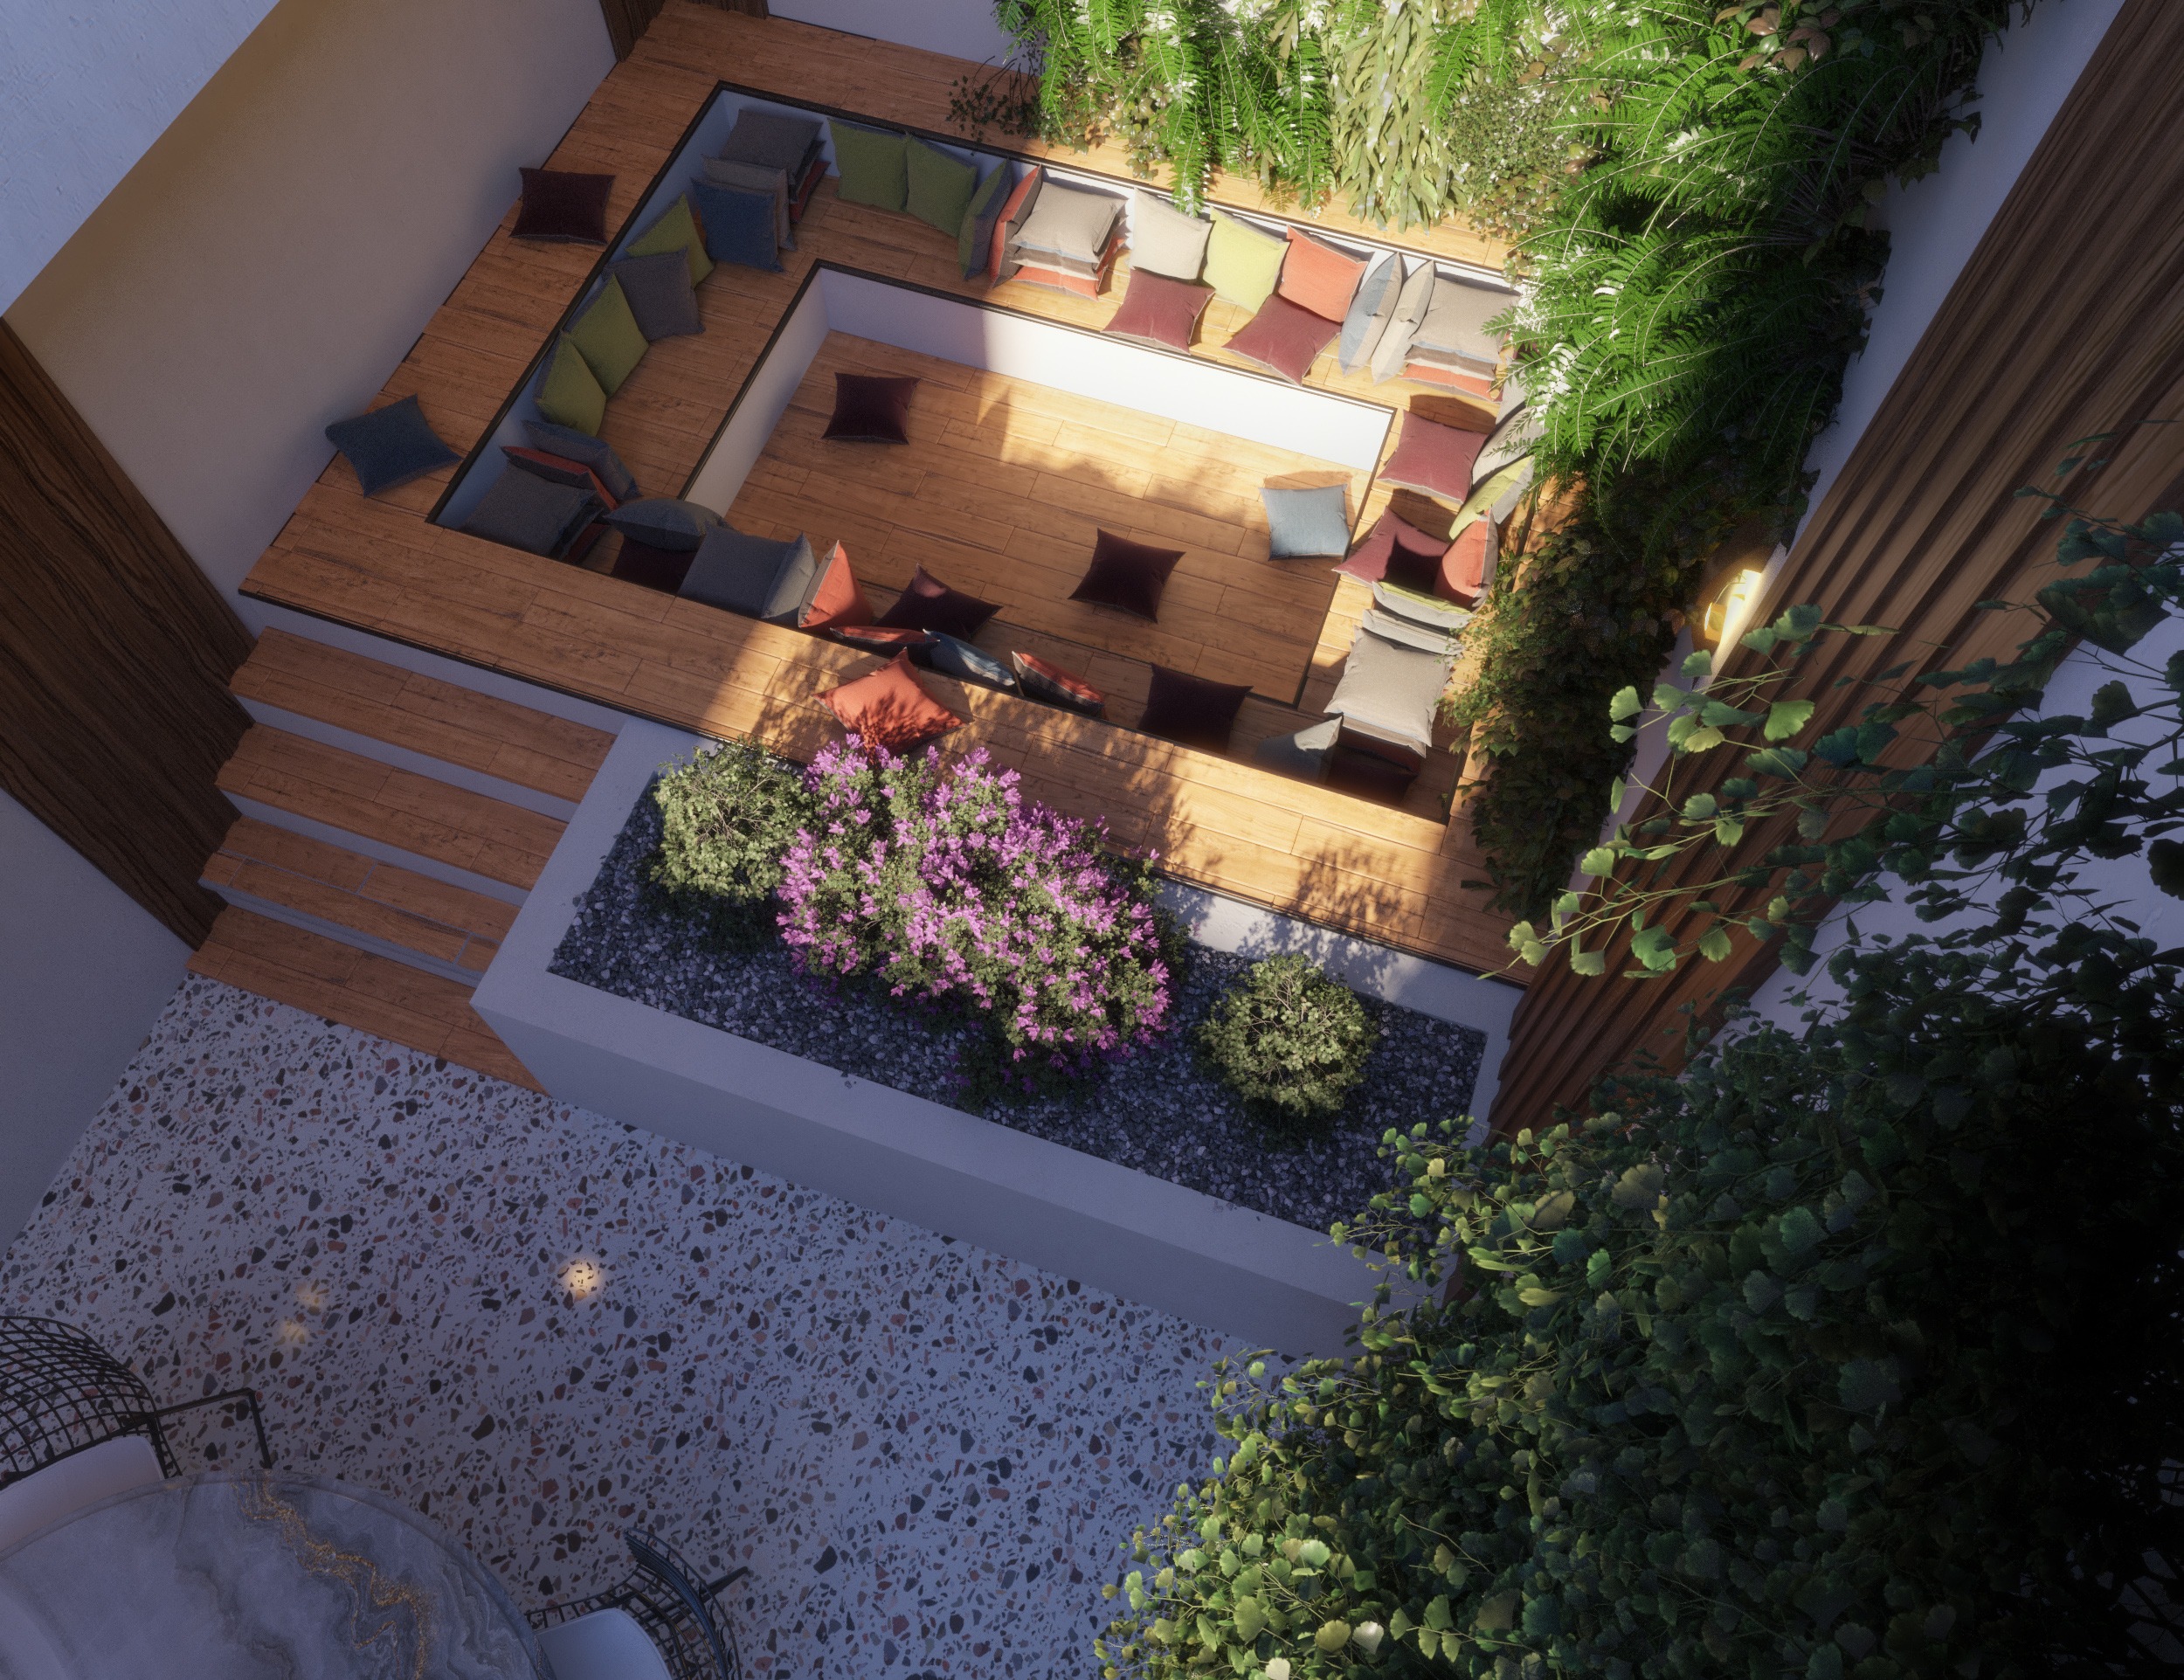 garden concept comfy atmosphere surrounded with plants